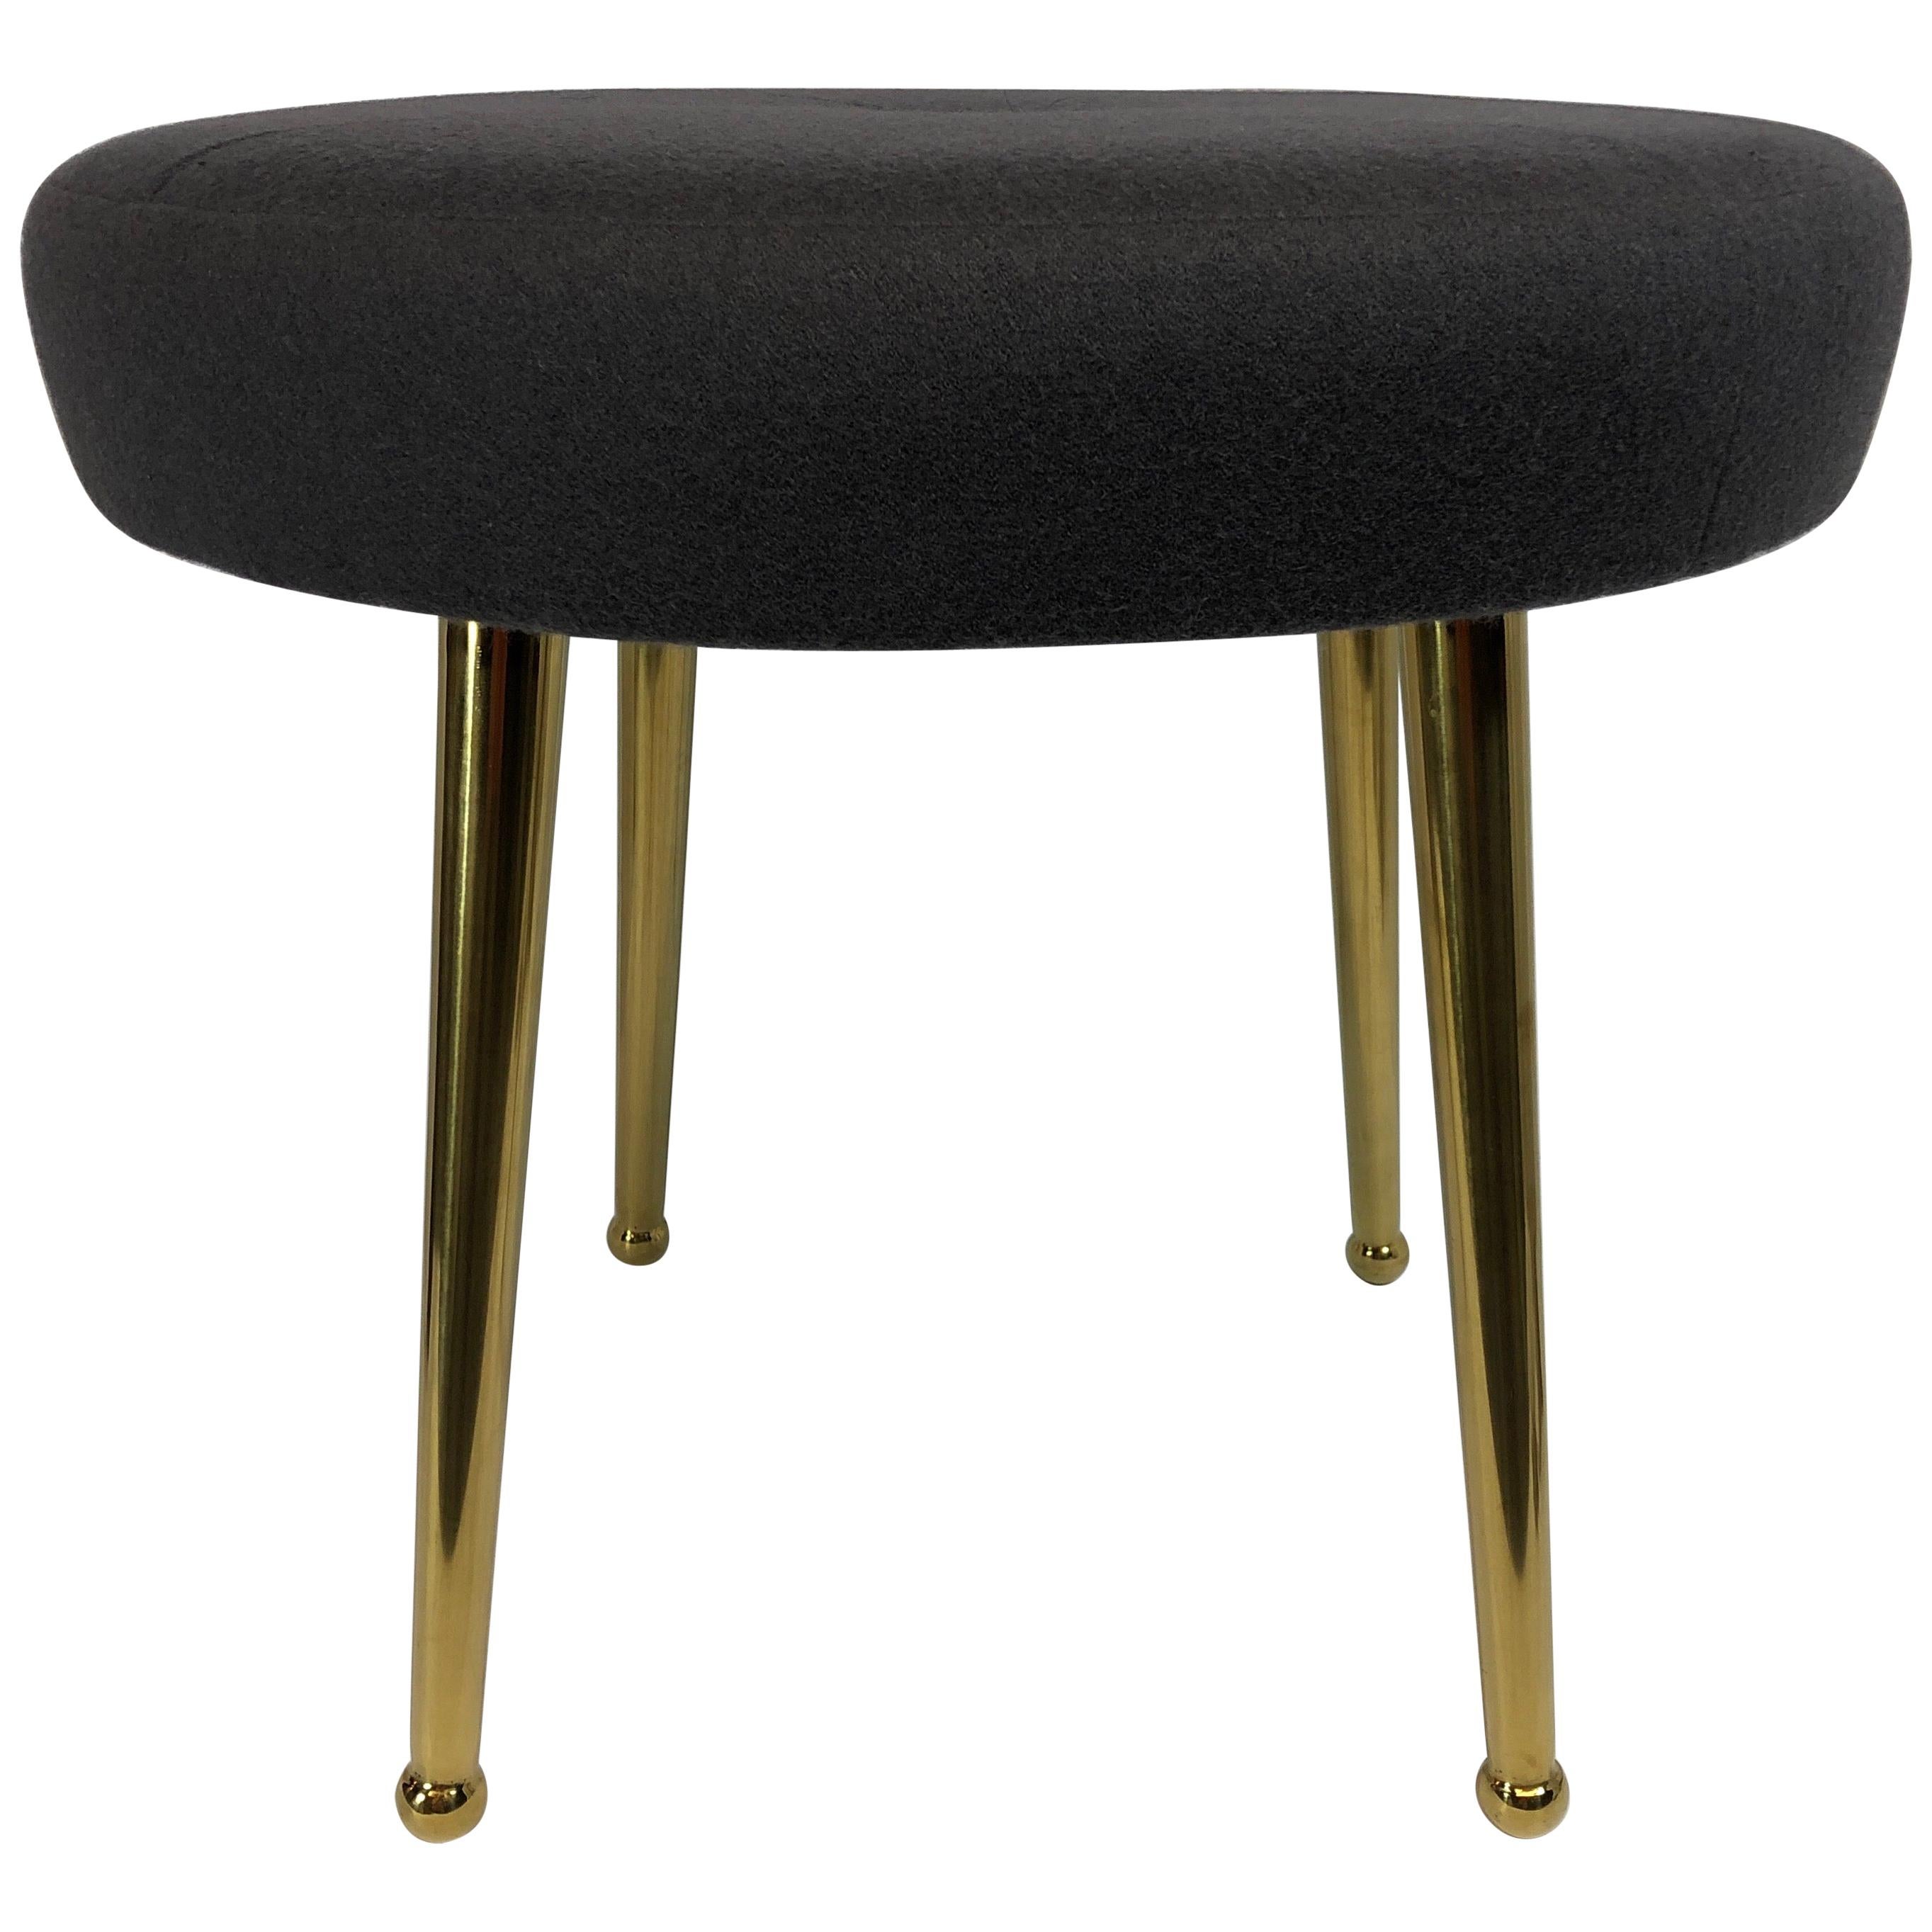 Custom Round Brass Pointe Leg Bench or Stool For Sale